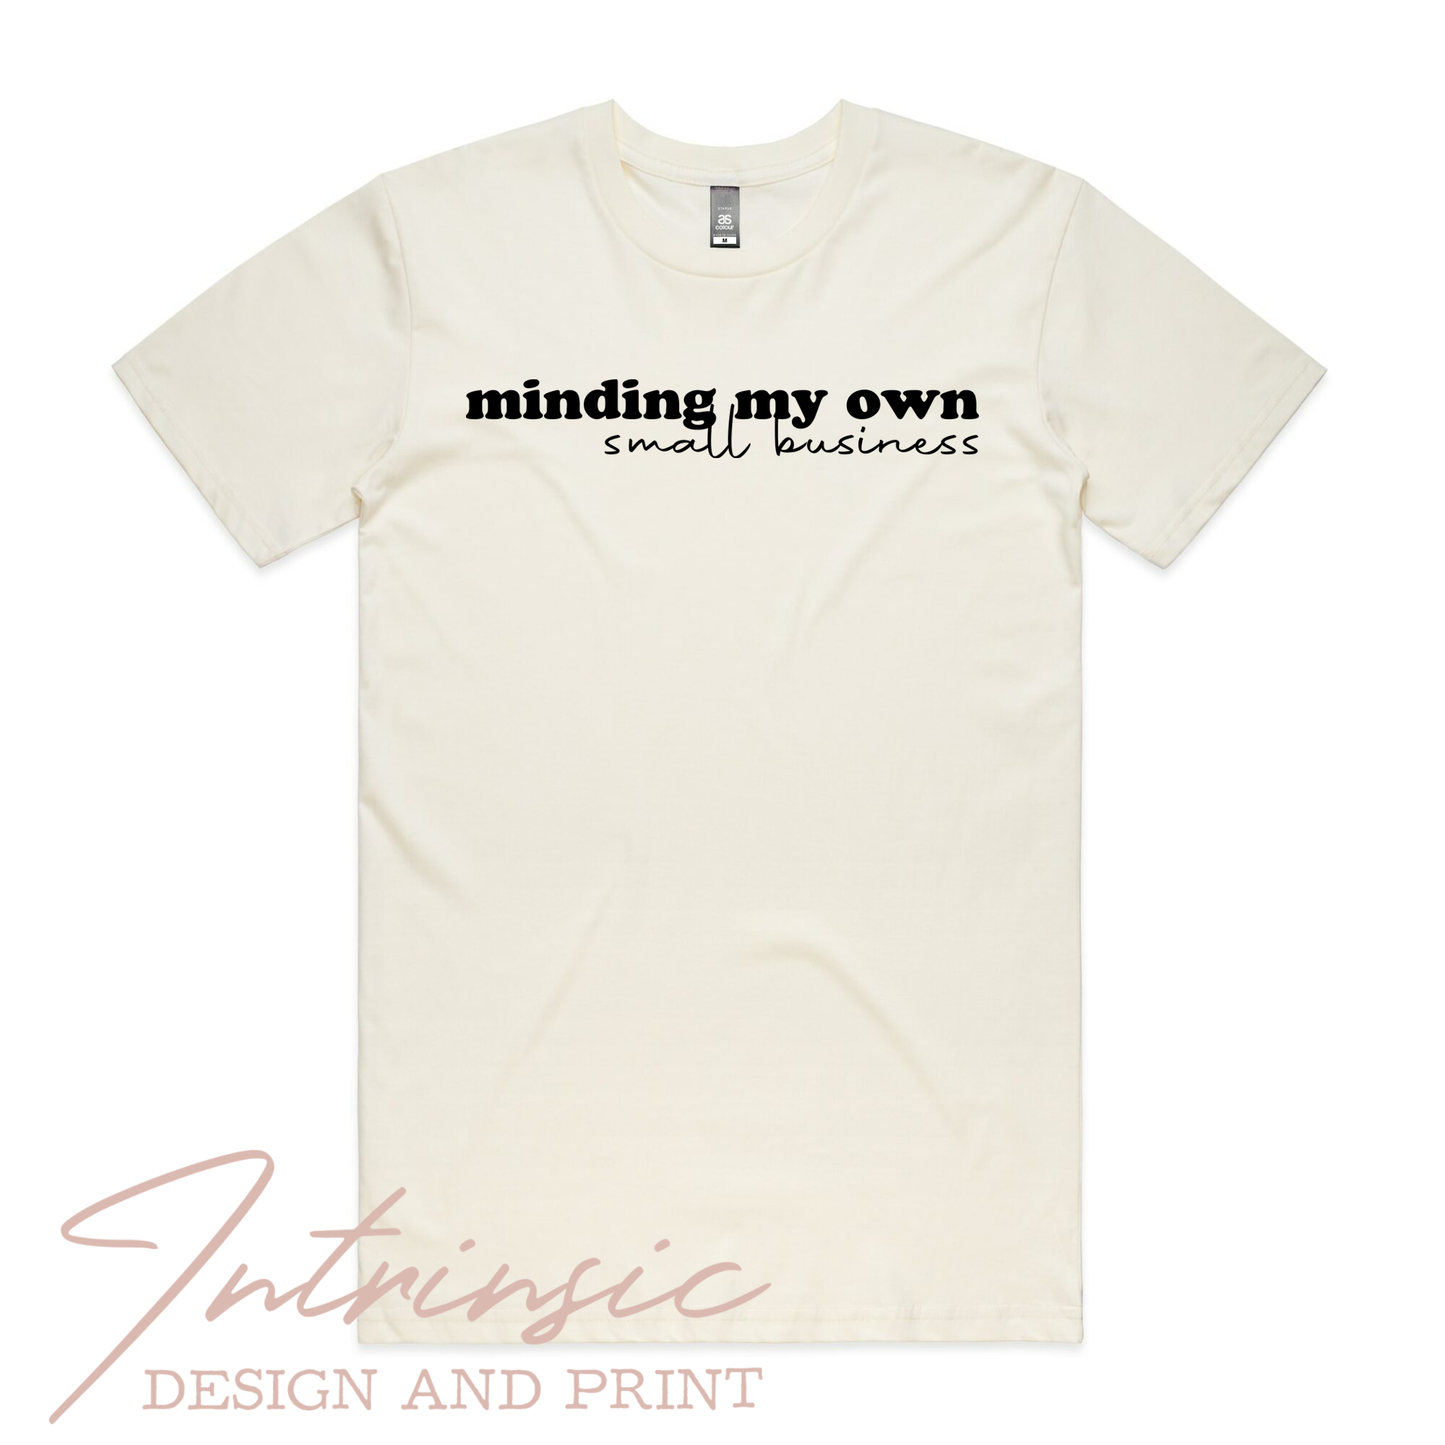 Minding my own small font - unisex